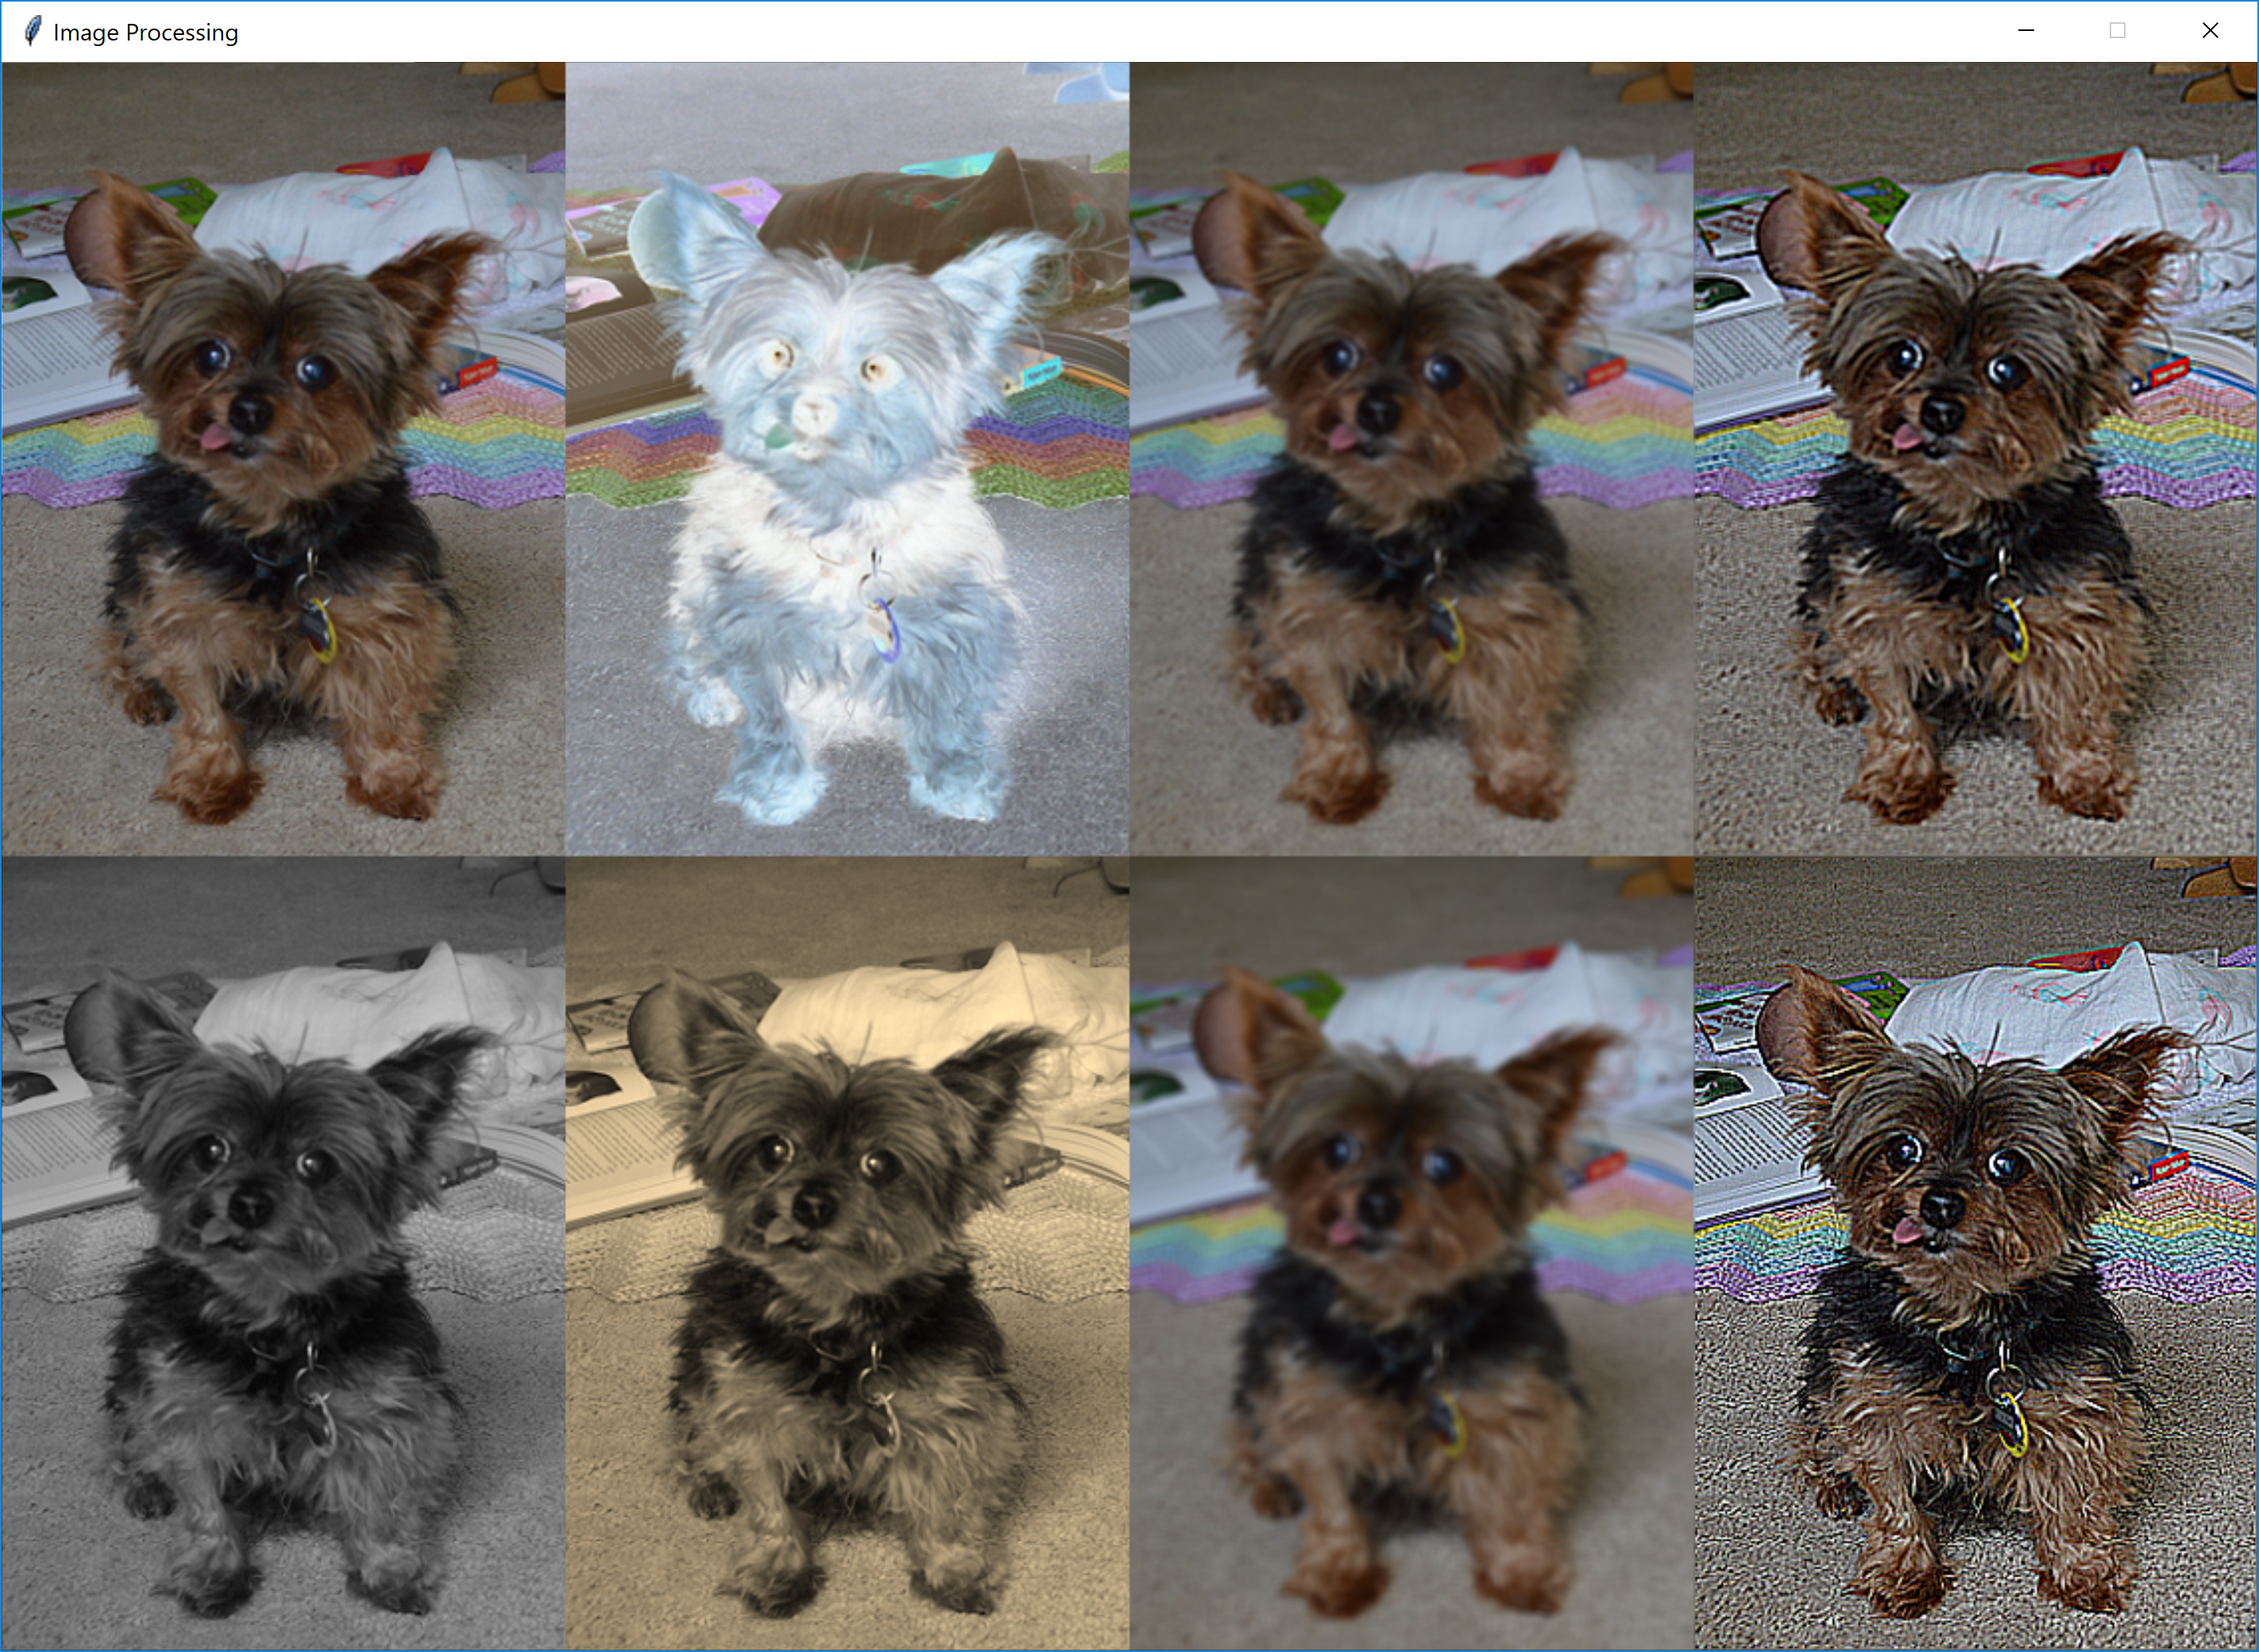 <image: different image processing outputs>